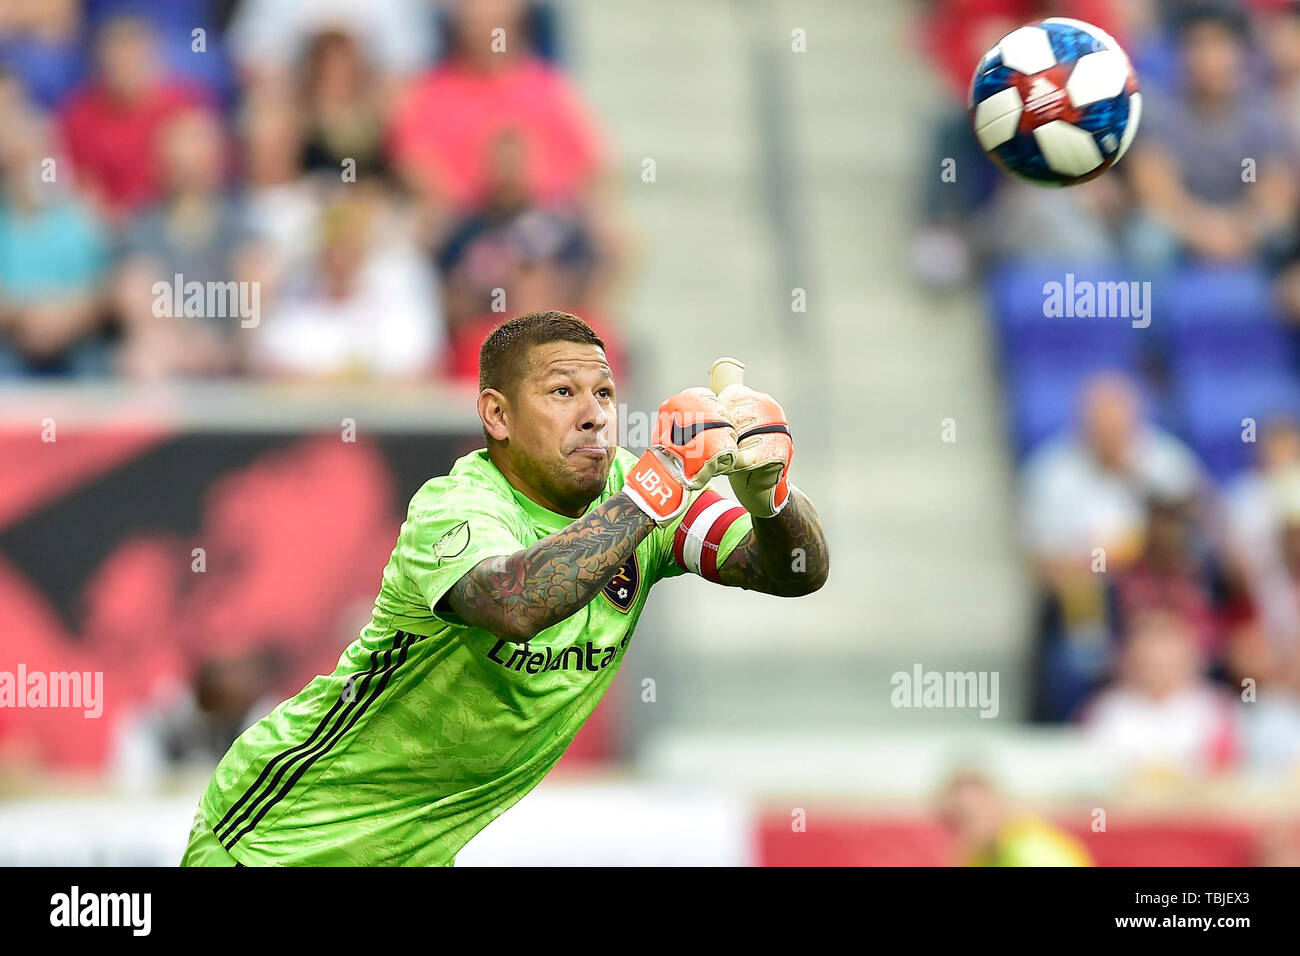 Harrison, New Jersey, USA. 1st June, 2019. Real Salt Lake goalkeeper NICK RIMANDO (18) punches the ball clear at Red Bull Arena in Harrison New Jersey New York defeats Real Salt Lake 4 to 0 Credit: Brooks Von Arx/ZUMA Wire/Alamy Live News Stock Photo